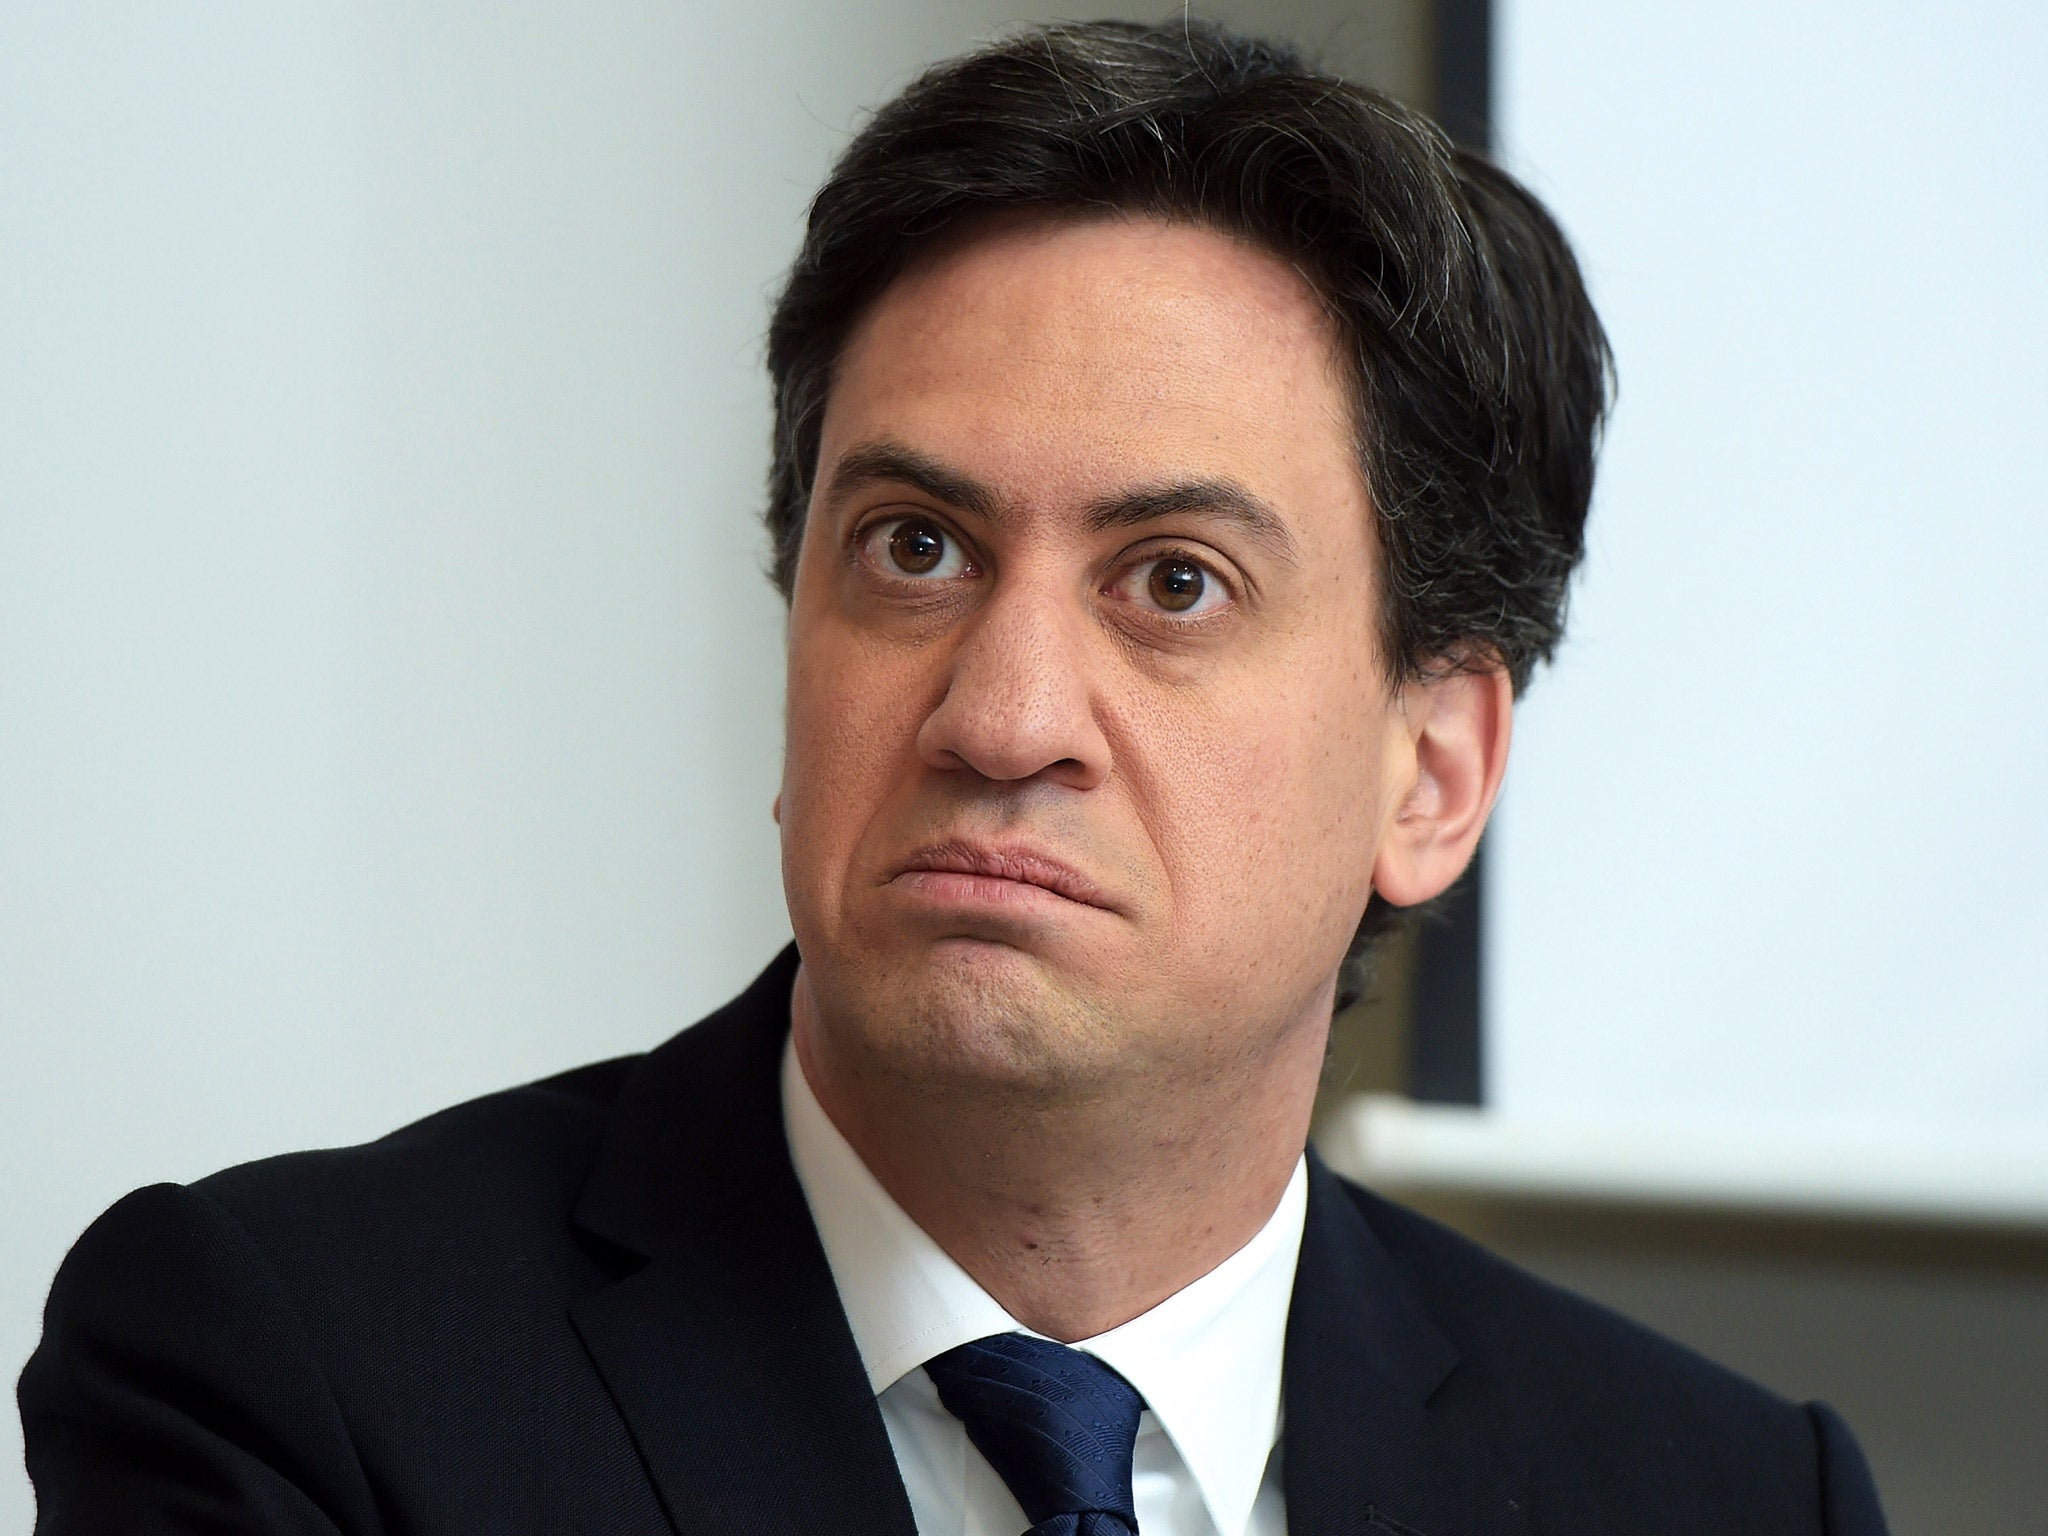 Some Labour members are worried that Ed Miliband’s approach is damaging the party's standing with voters (Getty)